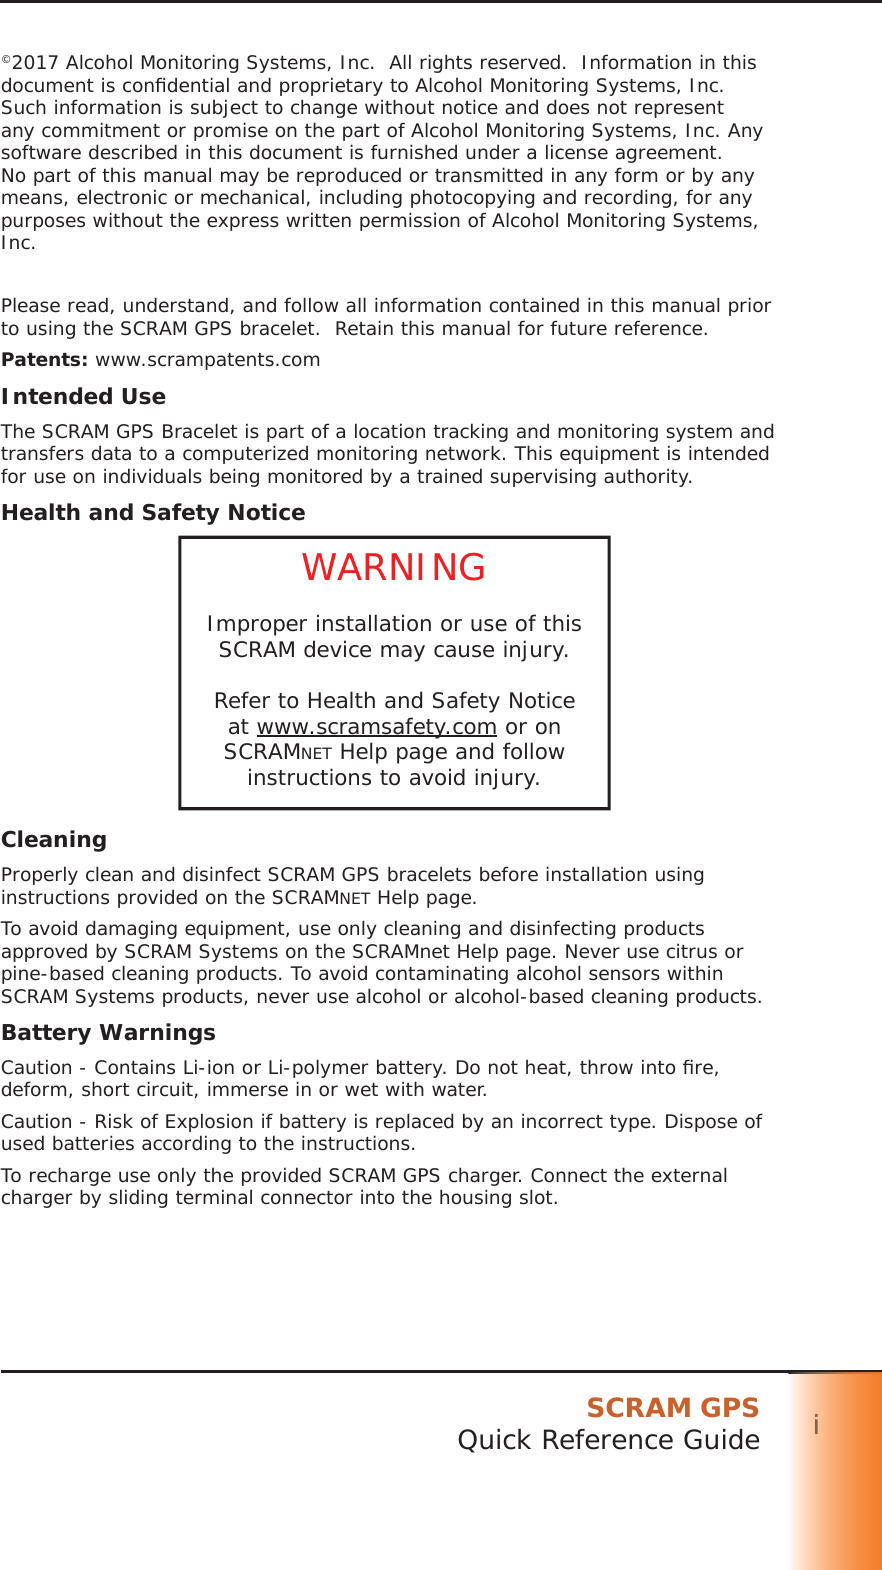 SCRAM GPSQuick Reference Guide iiii©2017 Alcohol Monitoring Systems, Inc.  All rights reserved.  Information in this document is conﬁ dential and proprietary to Alcohol Monitoring Systems, Inc. Such information is subject to change without notice and does not represent any commitment or promise on the part of Alcohol Monitoring Systems, Inc. Any software described in this document is furnished under a license agreement. No part of this manual may be reproduced or transmitted in any form or by any means, electronic or mechanical, including photocopying and recording, for any purposes without the express written permission of Alcohol Monitoring Systems, Inc.Please read, understand, and follow all information contained in this manual prior to using the SCRAM GPS bracelet.  Retain this manual for future reference.Patents: www.scrampatents.comIntended UseThe SCRAM GPS Bracelet is part of a location tracking and monitoring system and transfers data to a computerized monitoring network. This equipment is intended for use on individuals being monitored by a trained supervising authority.Health and Safety NoticeWARNINGImproper installation or use of this SCRAM device may cause injury.Refer to Health and Safety Notice at www.scramsafety.com or on SCRAMNET Help page and follow instructions to avoid injury.CleaningProperly clean and disinfect SCRAM GPS bracelets before installation using instructions provided on the SCRAMNET Help page.To avoid damaging equipment, use only cleaning and disinfecting products approved by SCRAM Systems on the SCRAMnet Help page. Never use citrus or pine-based cleaning products. To avoid contaminating alcohol sensors within SCRAM Systems products, never use alcohol or alcohol-based cleaning products.Battery WarningsCaution - Contains Li-ion or Li-polymer battery. Do not heat, throw into ﬁ re, deform, short circuit, immerse in or wet with water.Caution - Risk of Explosion if battery is replaced by an incorrect type. Dispose of used batteries according to the instructions.To recharge use only the provided SCRAM GPS charger. Connect the external charger by sliding terminal connector into the housing slot.